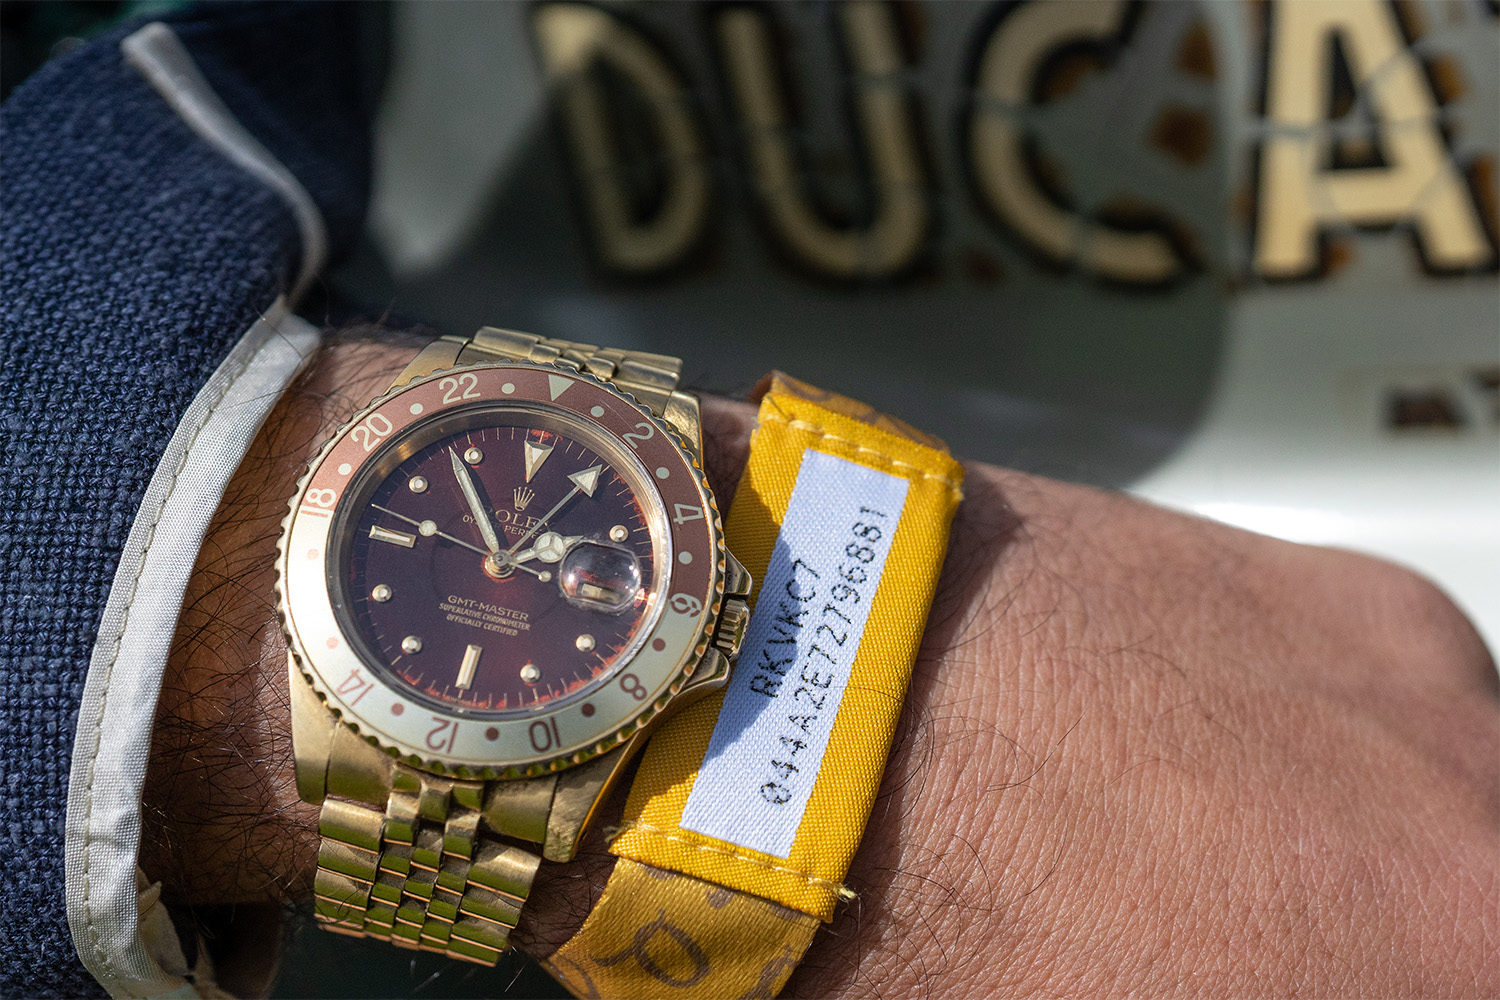 1982 Rootbeer Rolex GMT Master II in solid gold.